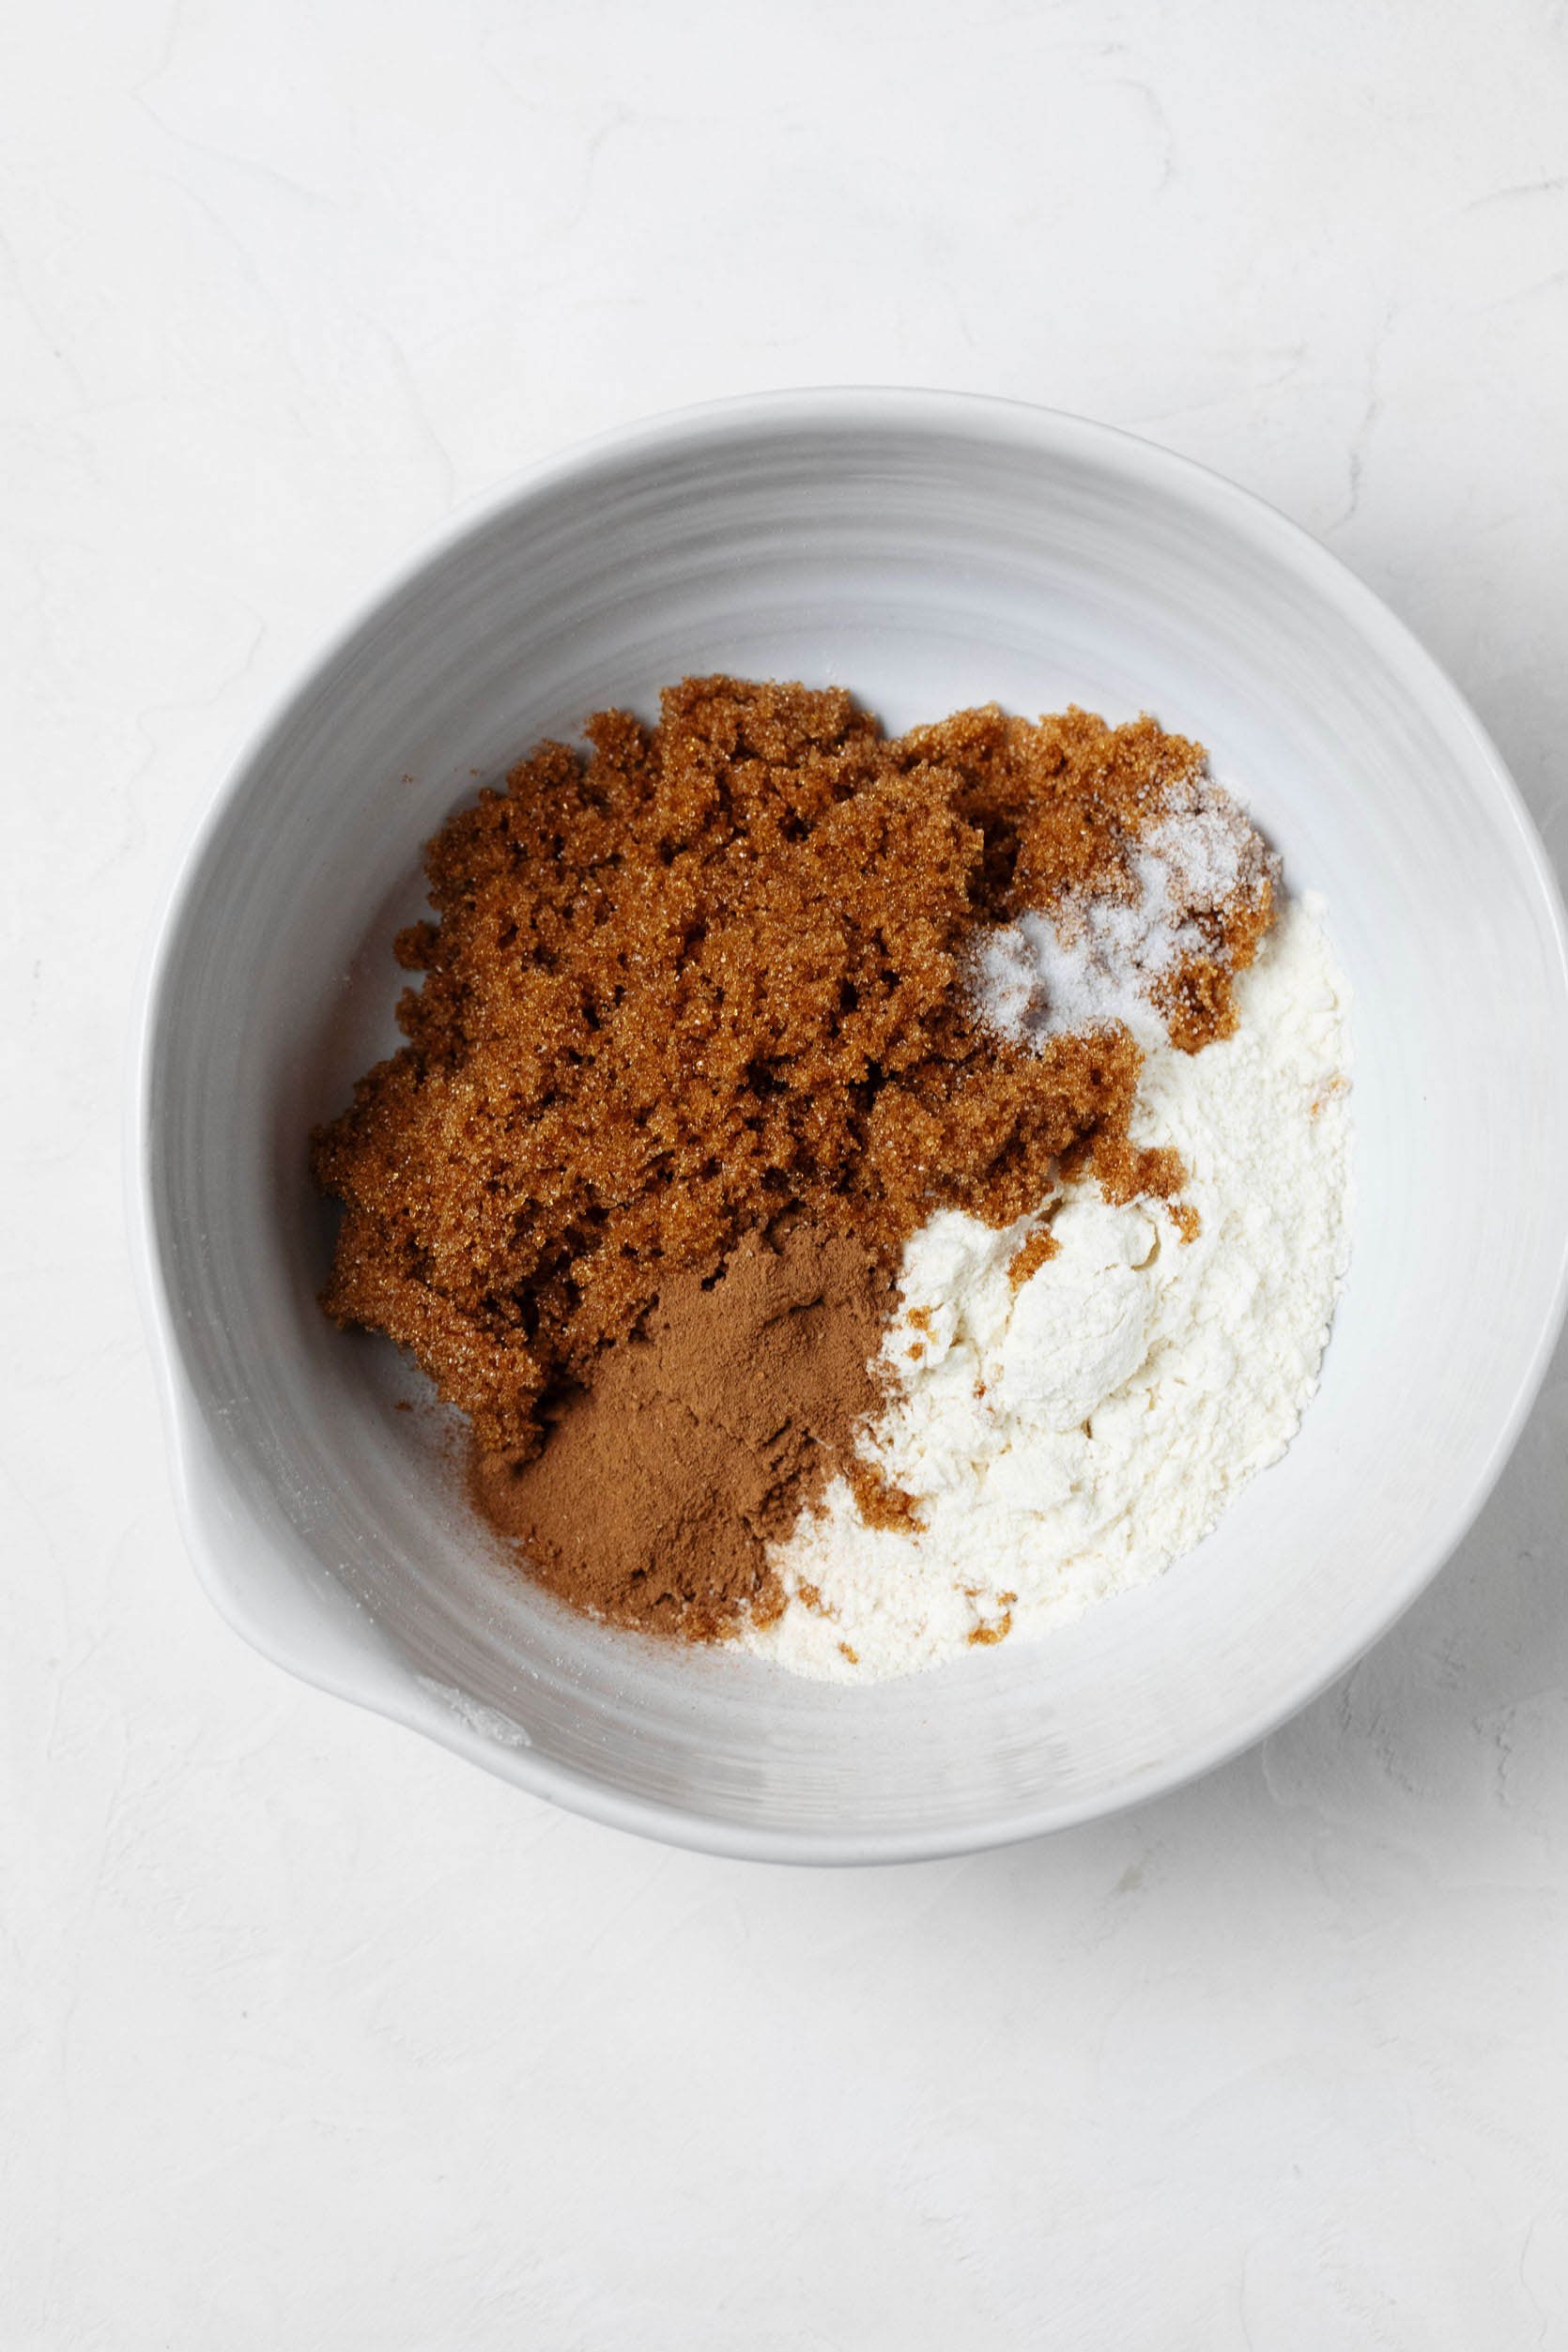 Dry ingredients, including all-purpose flour, cinnamon, and sugar, are pictured overhead in a white mixing bowl.